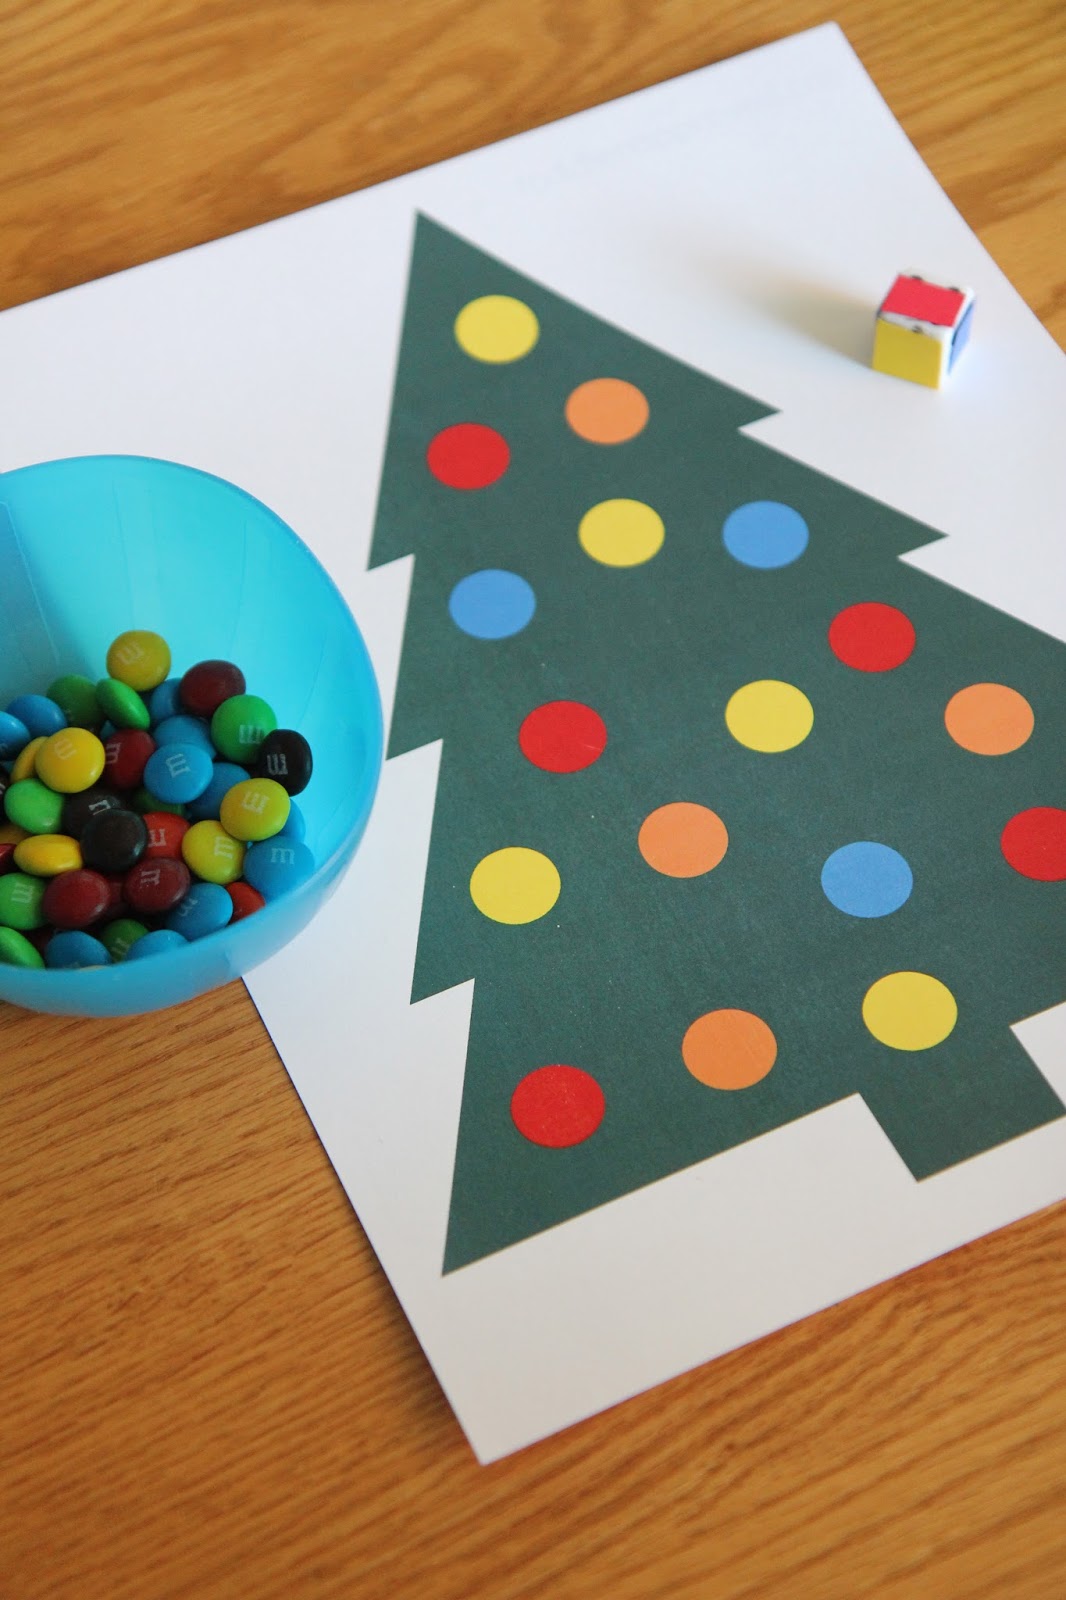 Toddler Approved!: Roll a Christmas Tree Color Game